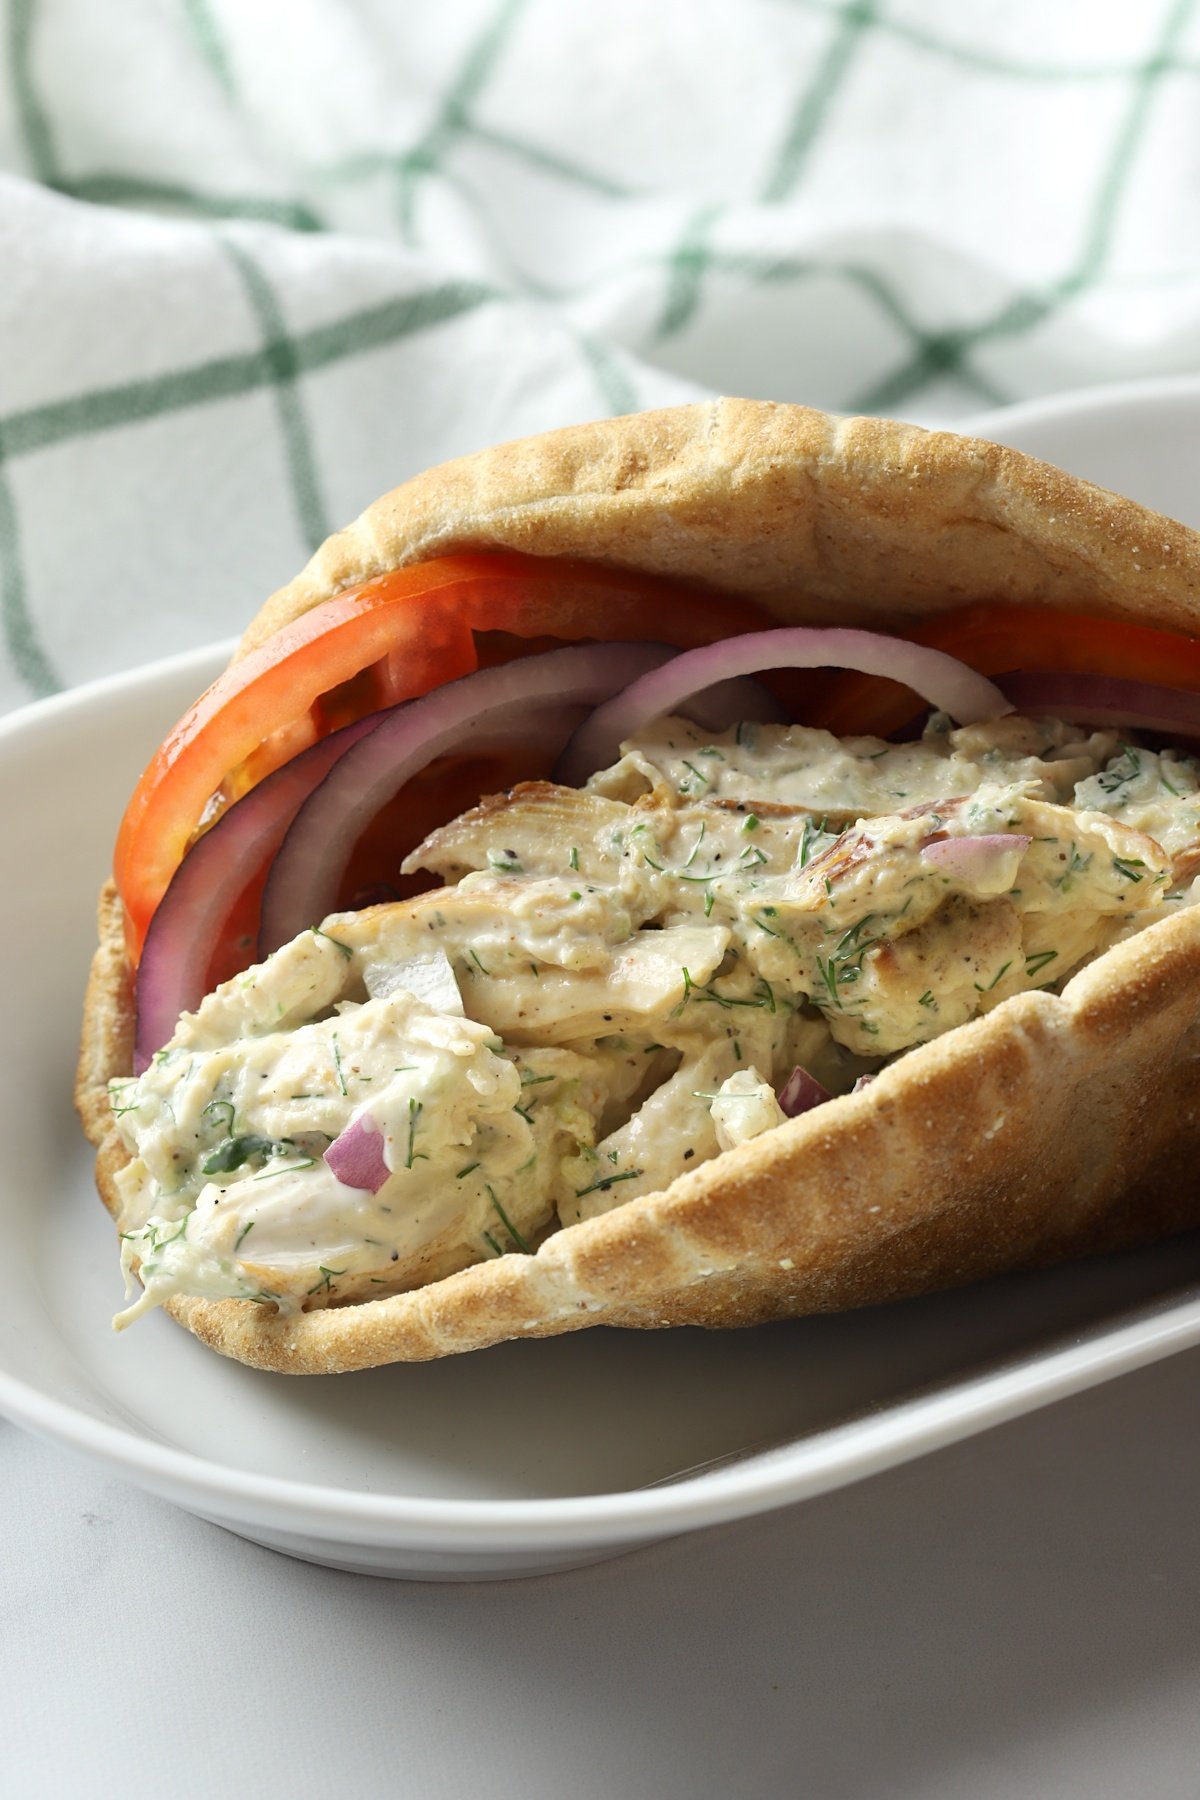 Pita bread filled with chicken salad, tomato slices, and red onion.